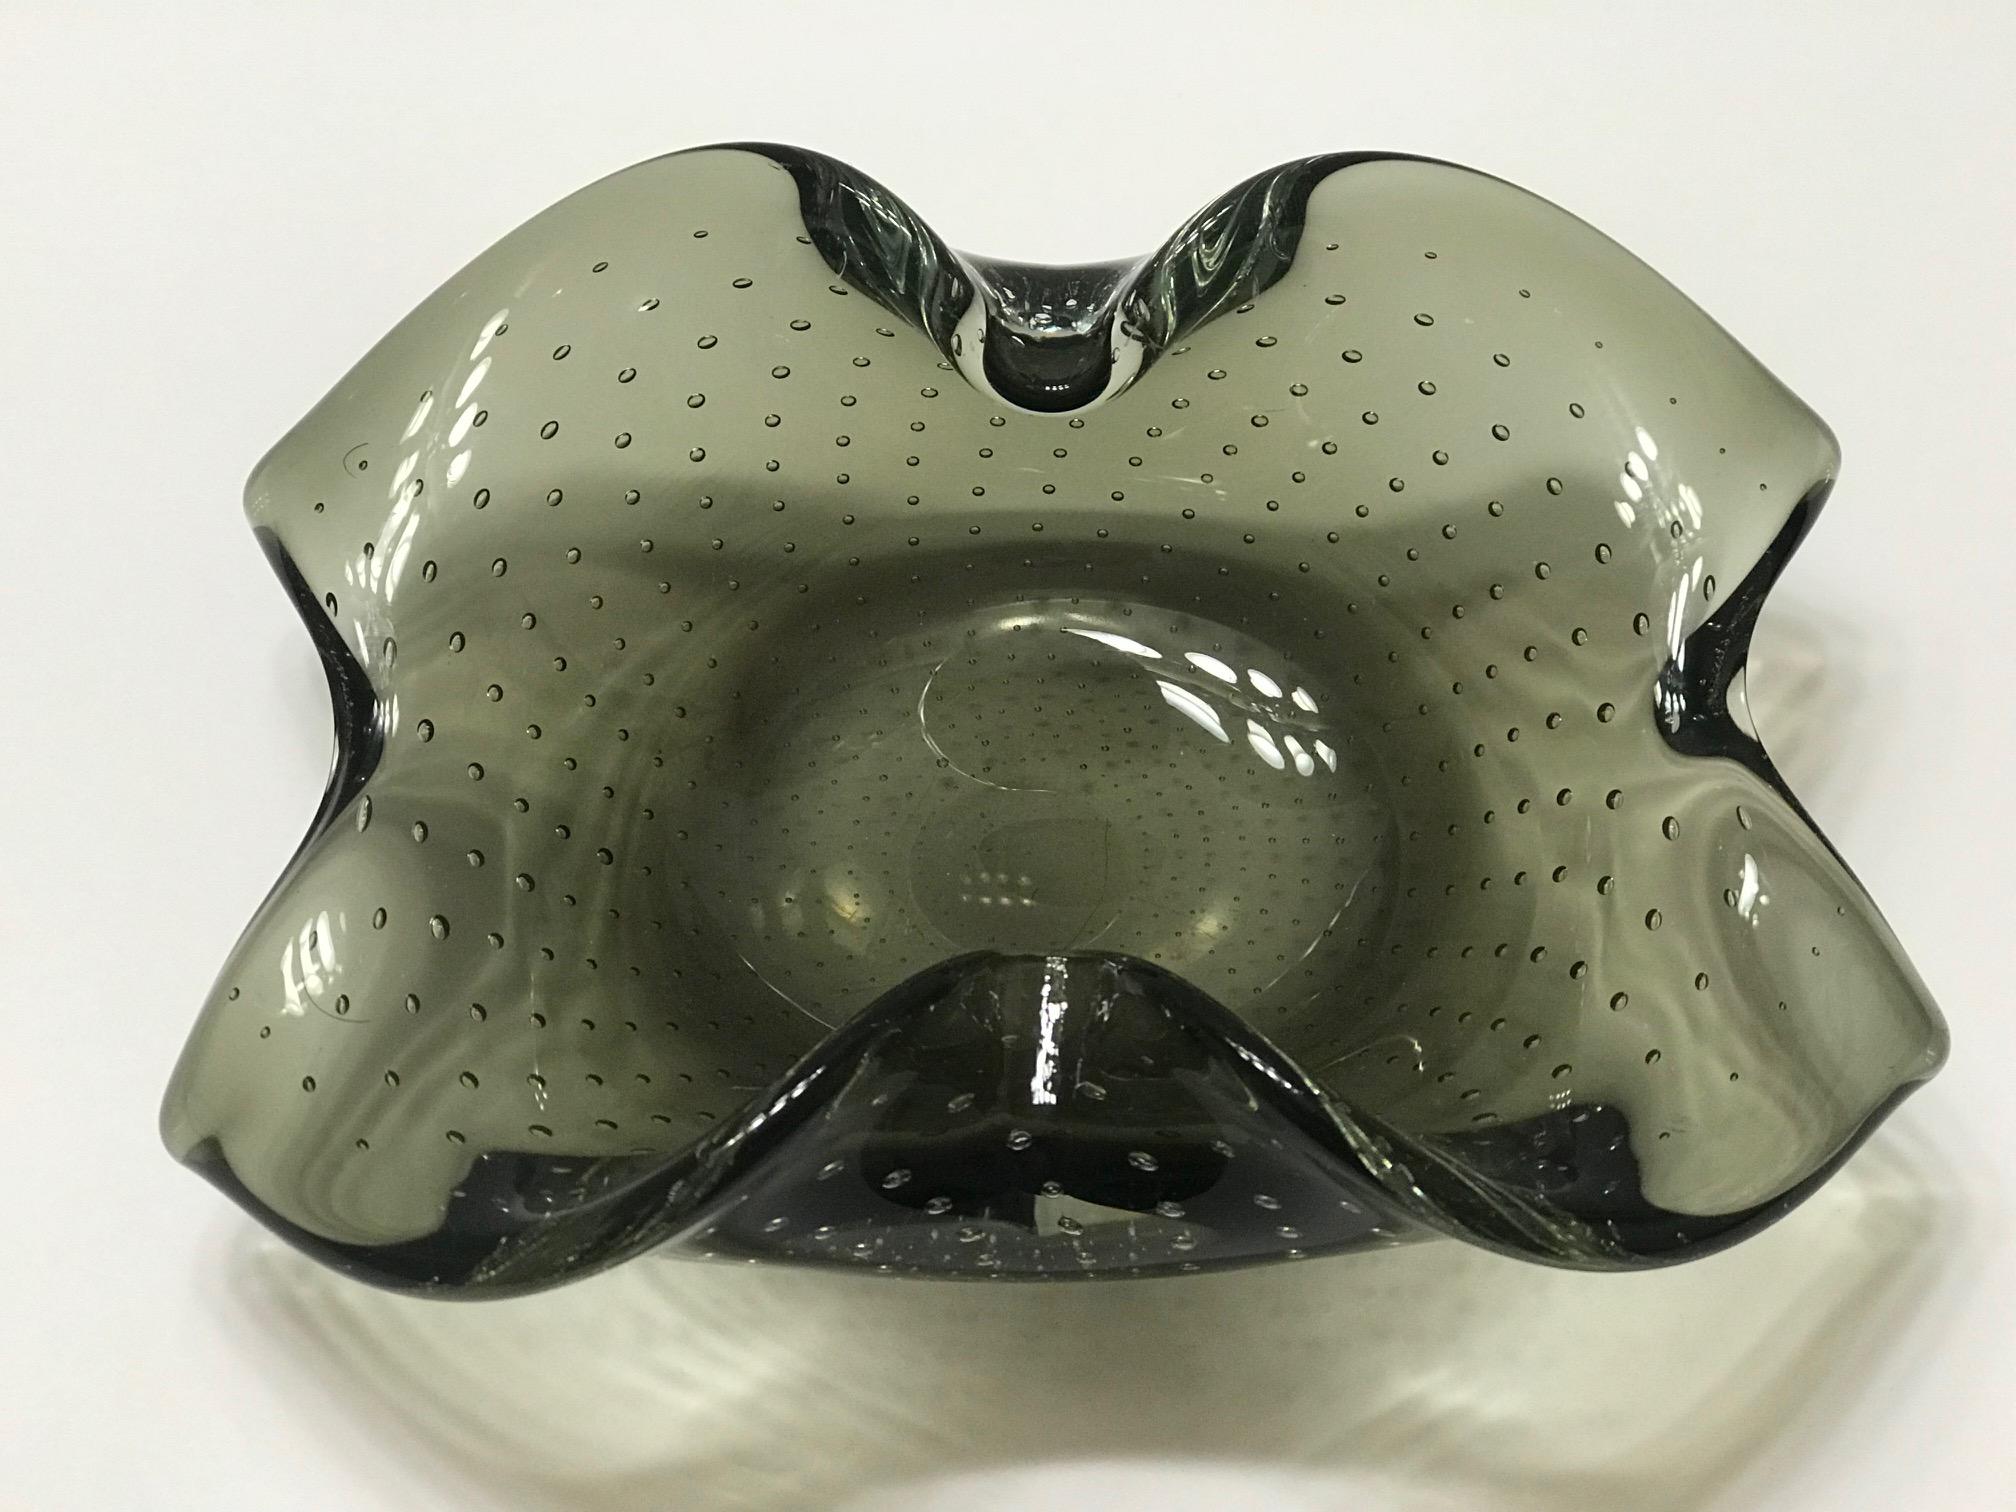 Italian 1950s Murano Glass Bowl with Organic Form and Controlled Bubbles 1